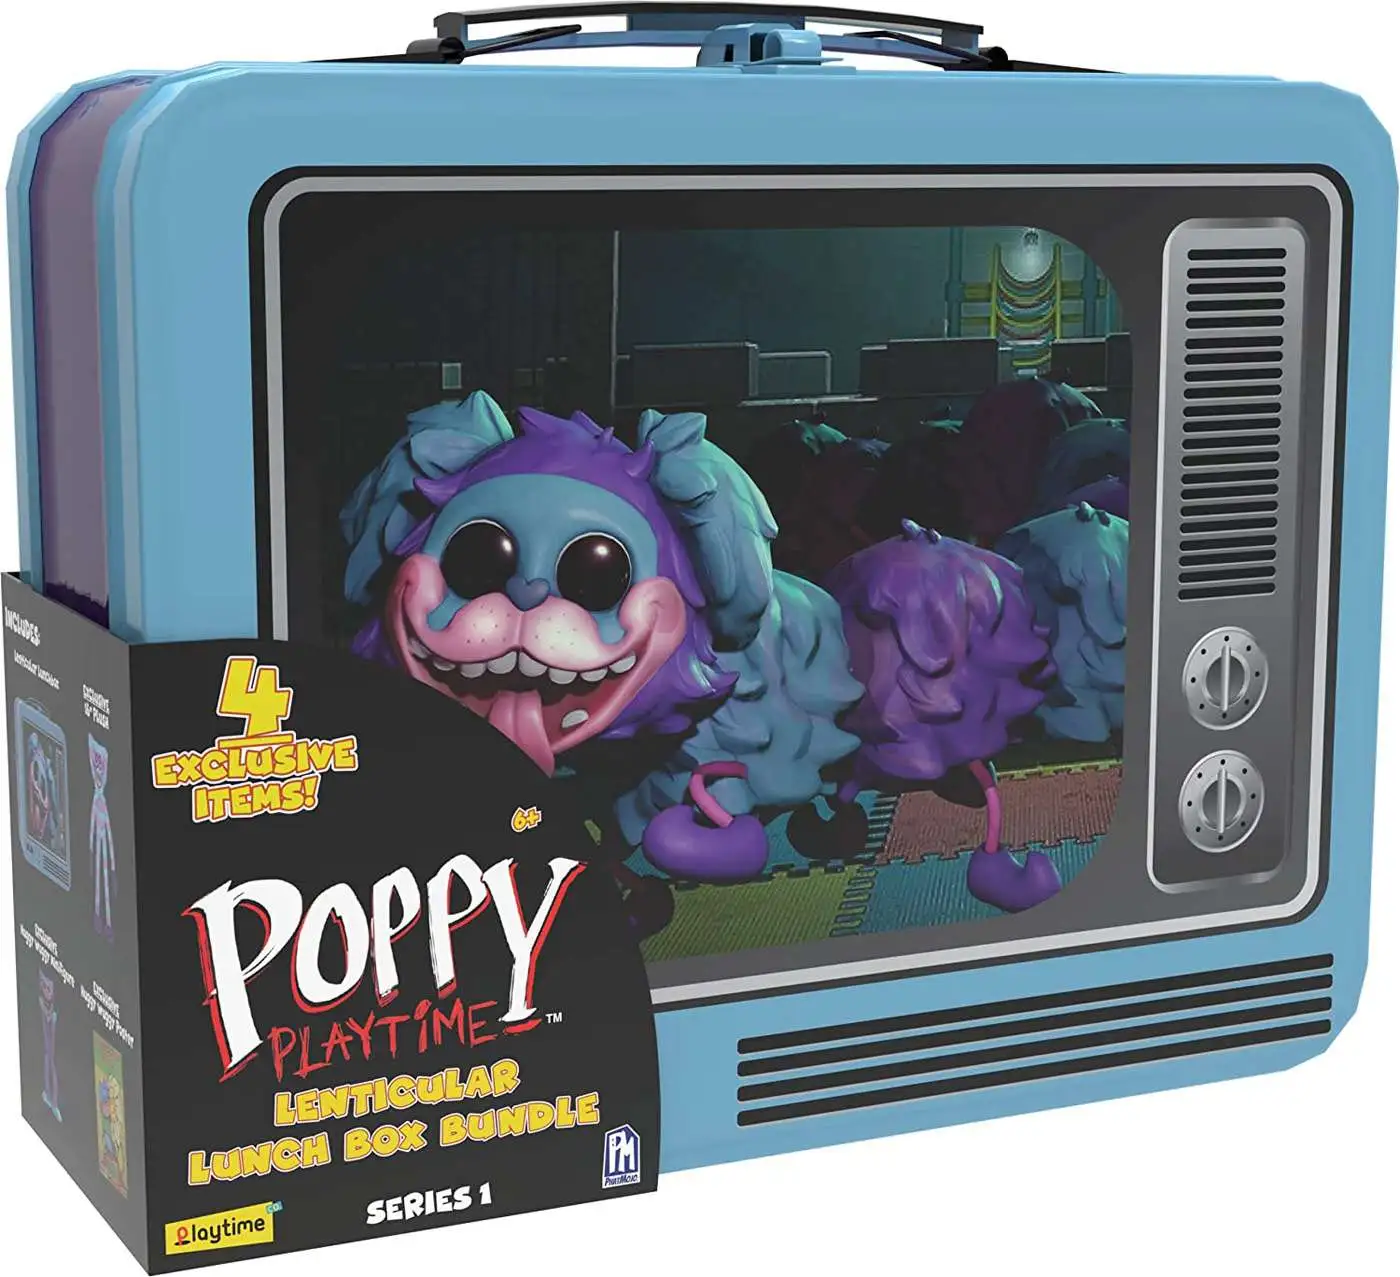 Poppy Playtime - Lenticular Lunchbox Bundle (Image-Changing Case w/ 4 Items, Series 1) [Online Exclusive] [Officially Licensed]